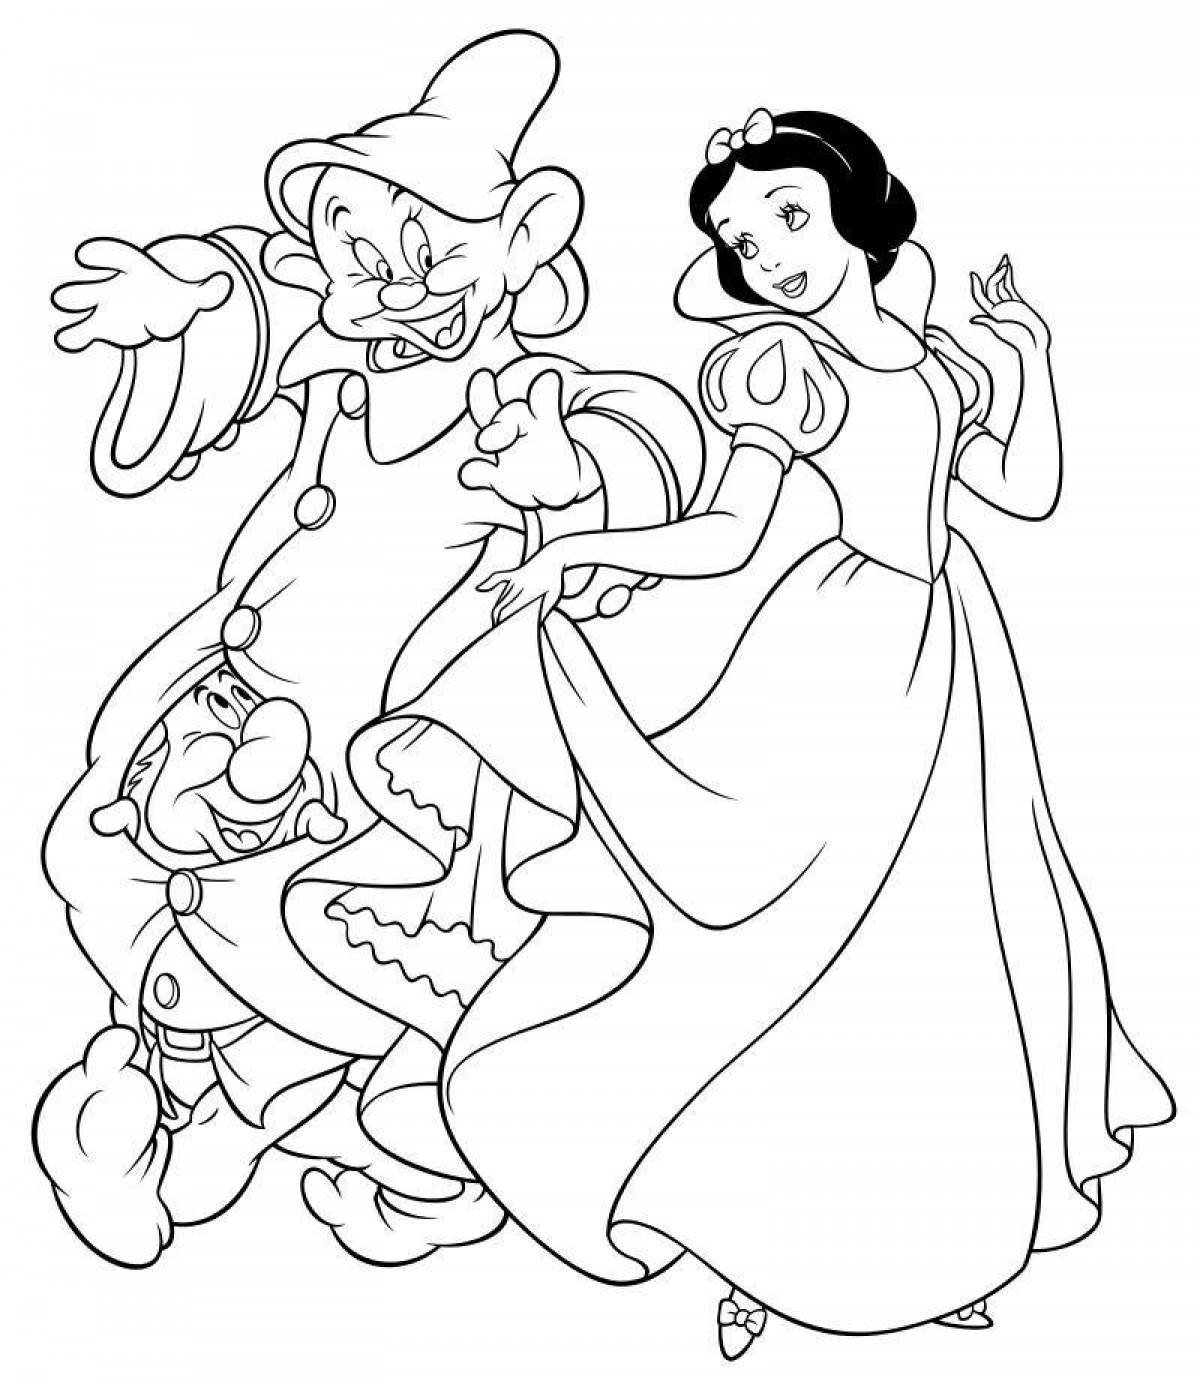 Coloring page charming snow white and 7 dwarfs